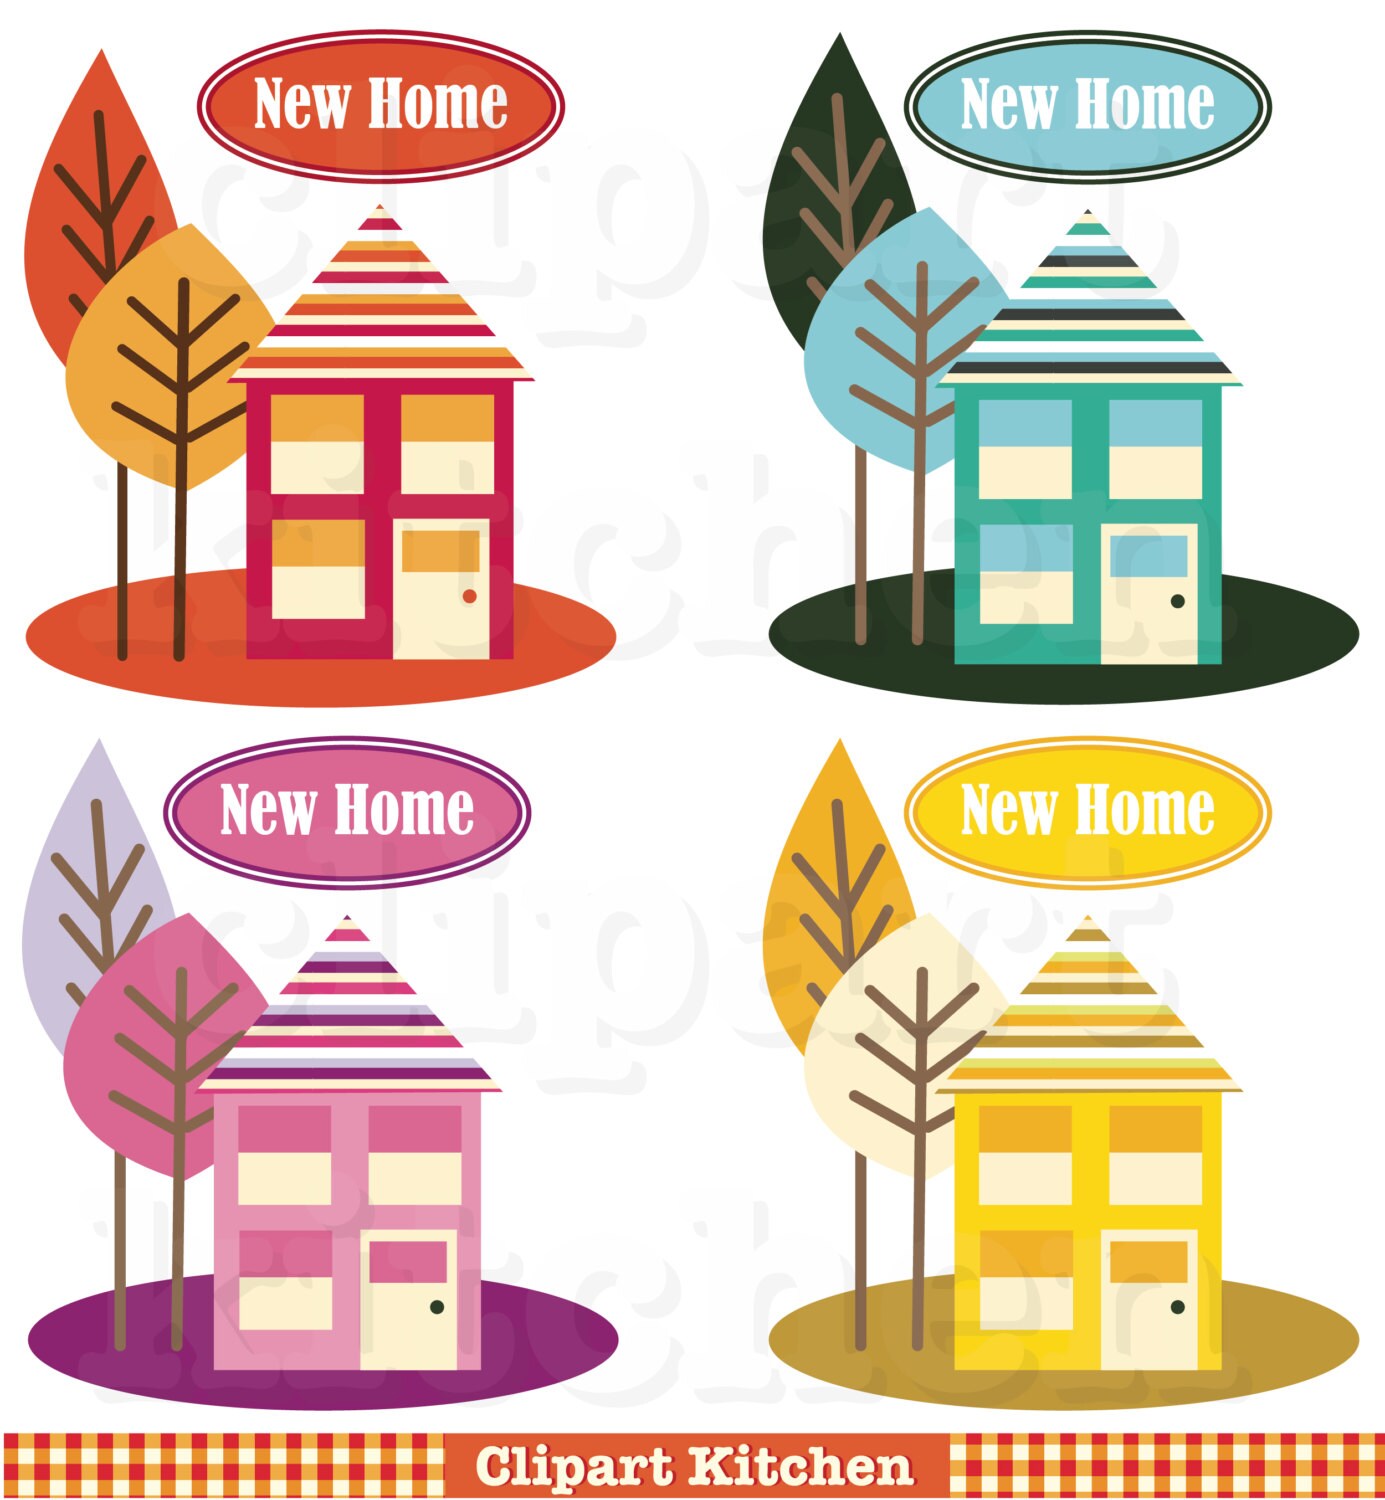 new home clipart images - photo #19